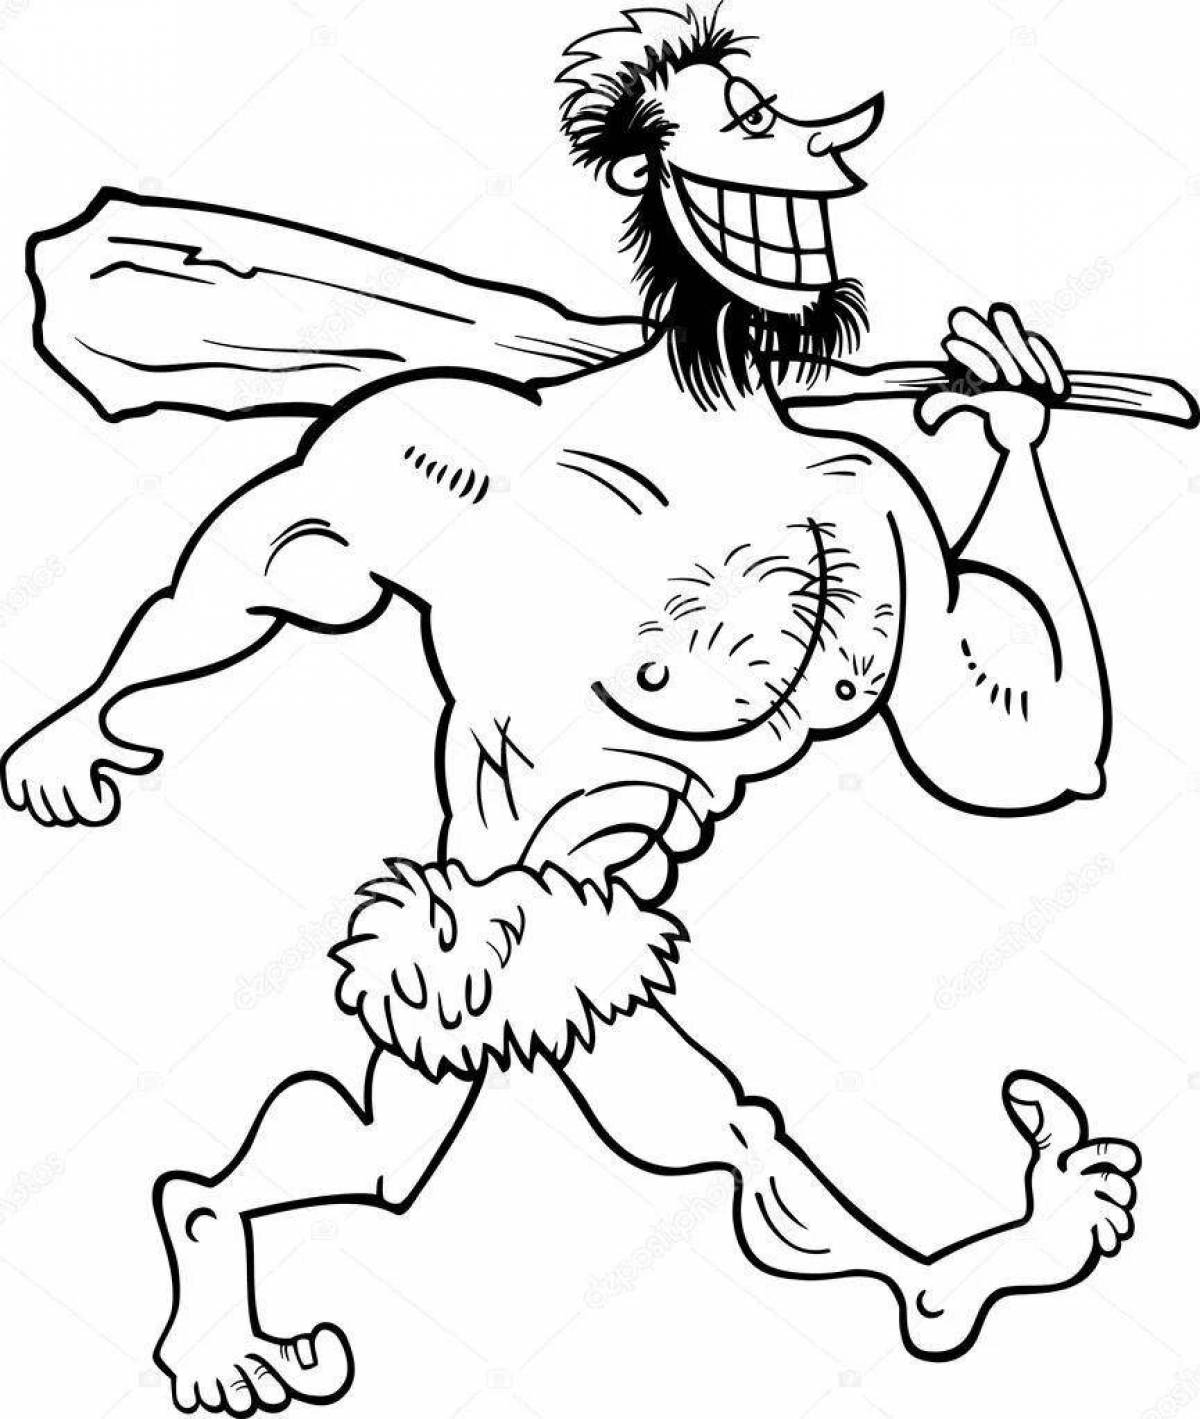 Animated coloring pages of primitive people